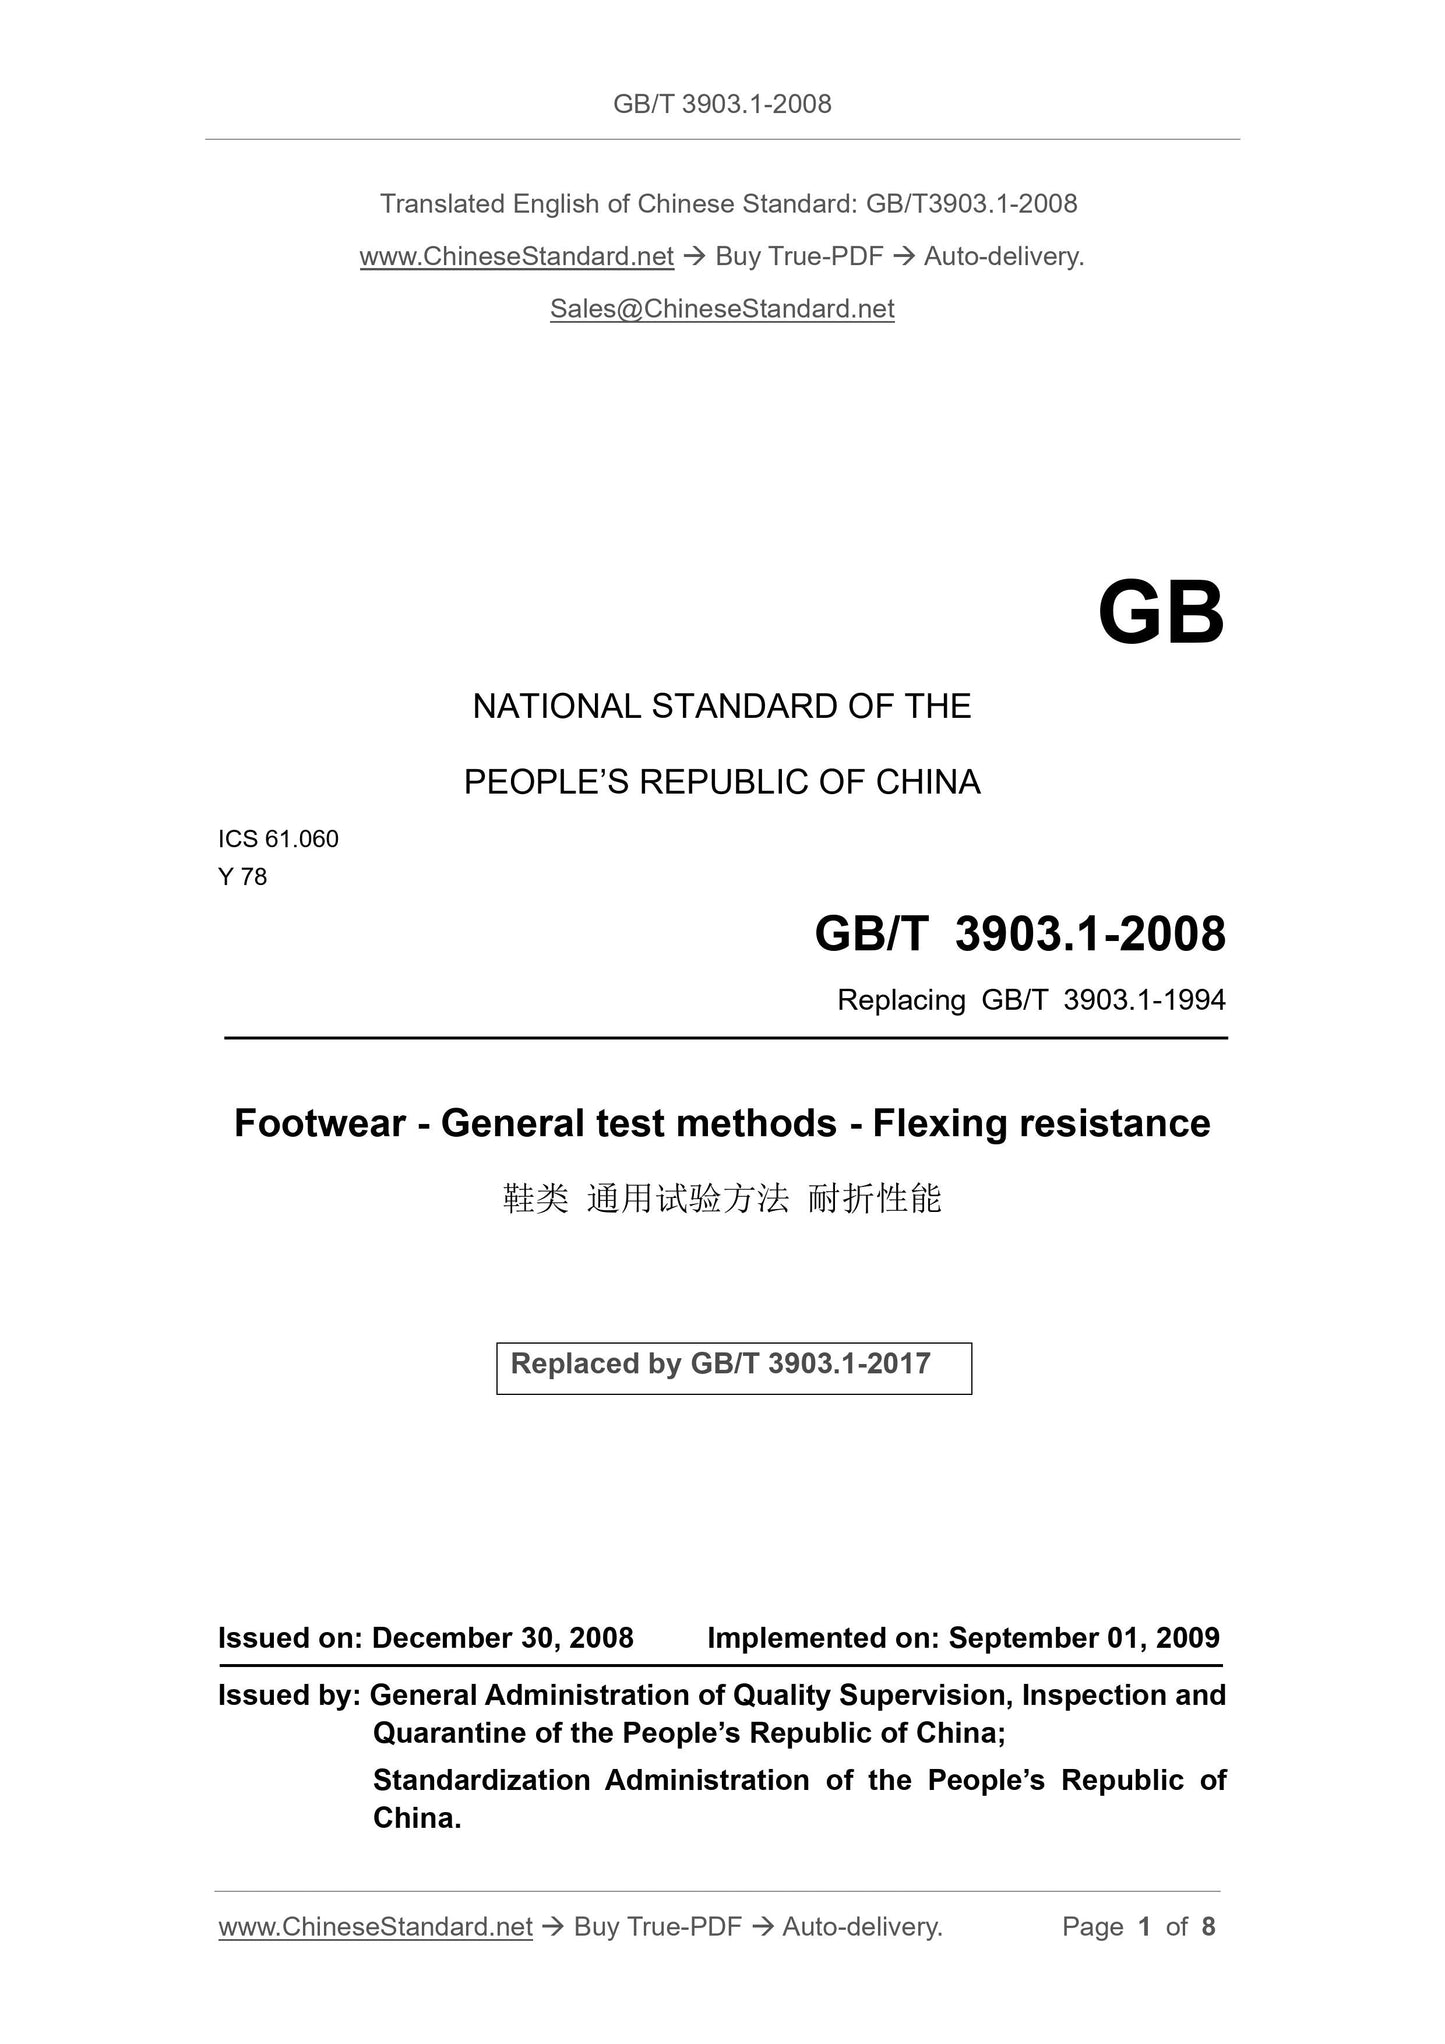 GB/T 3903.1-2008 Page 1